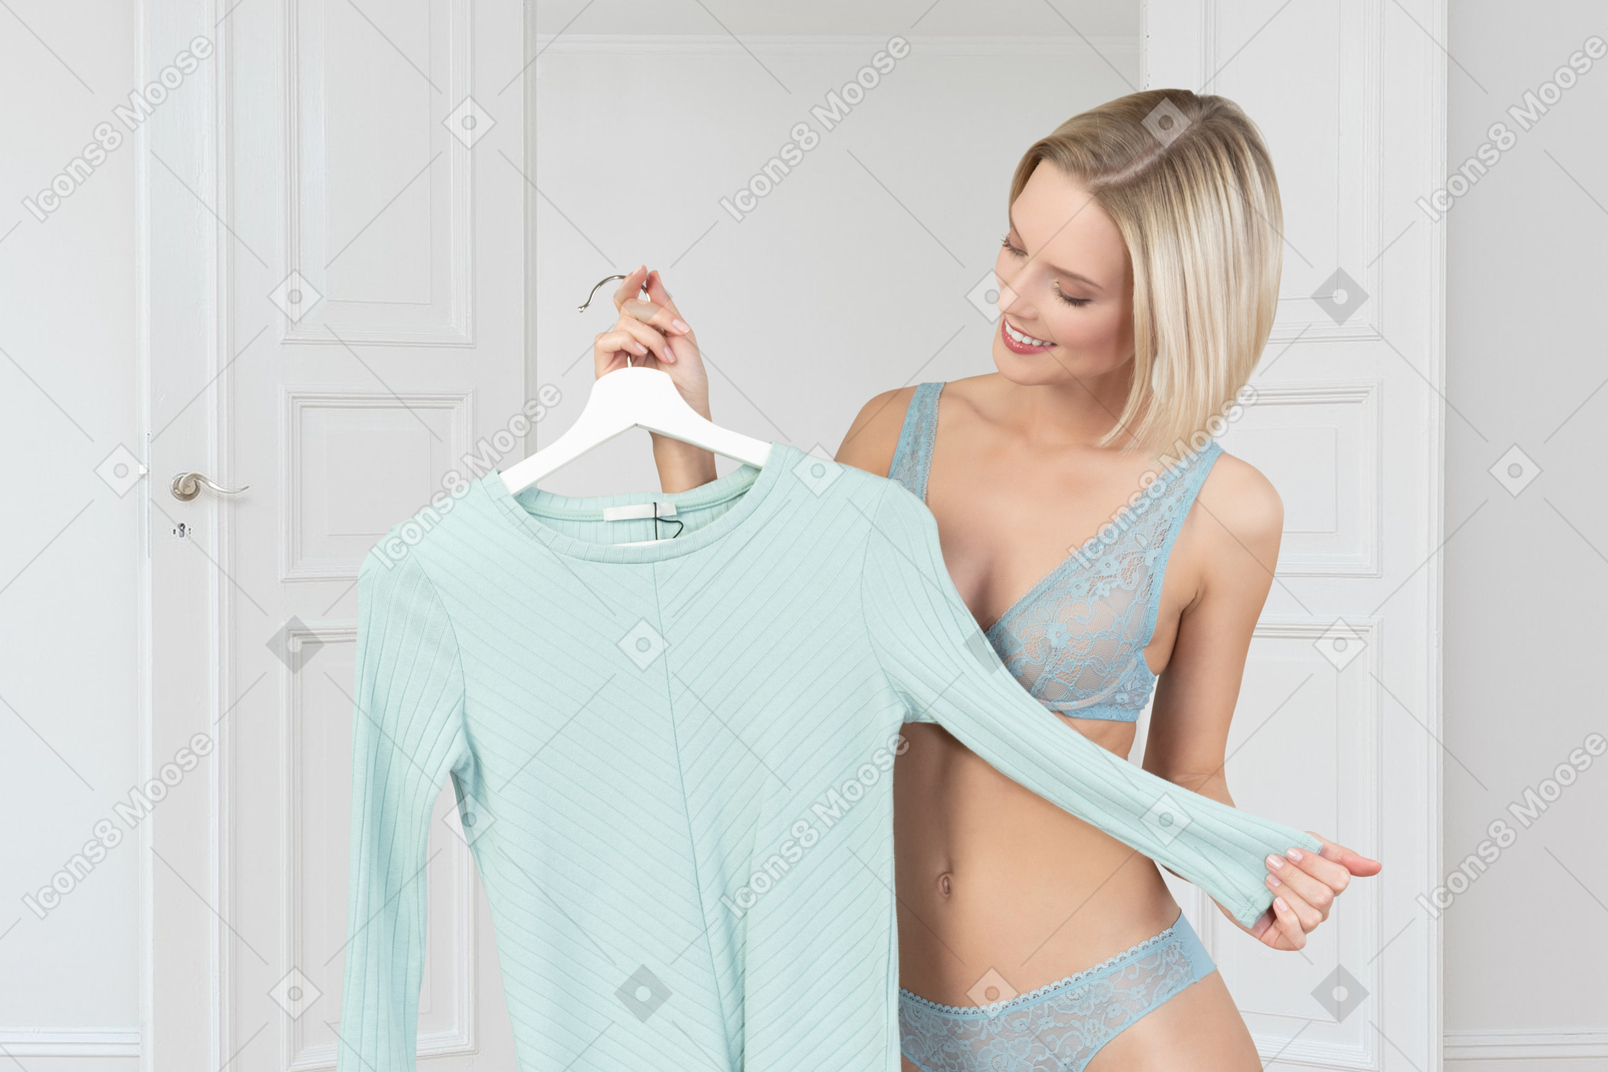 Woman in bra holding a shirt